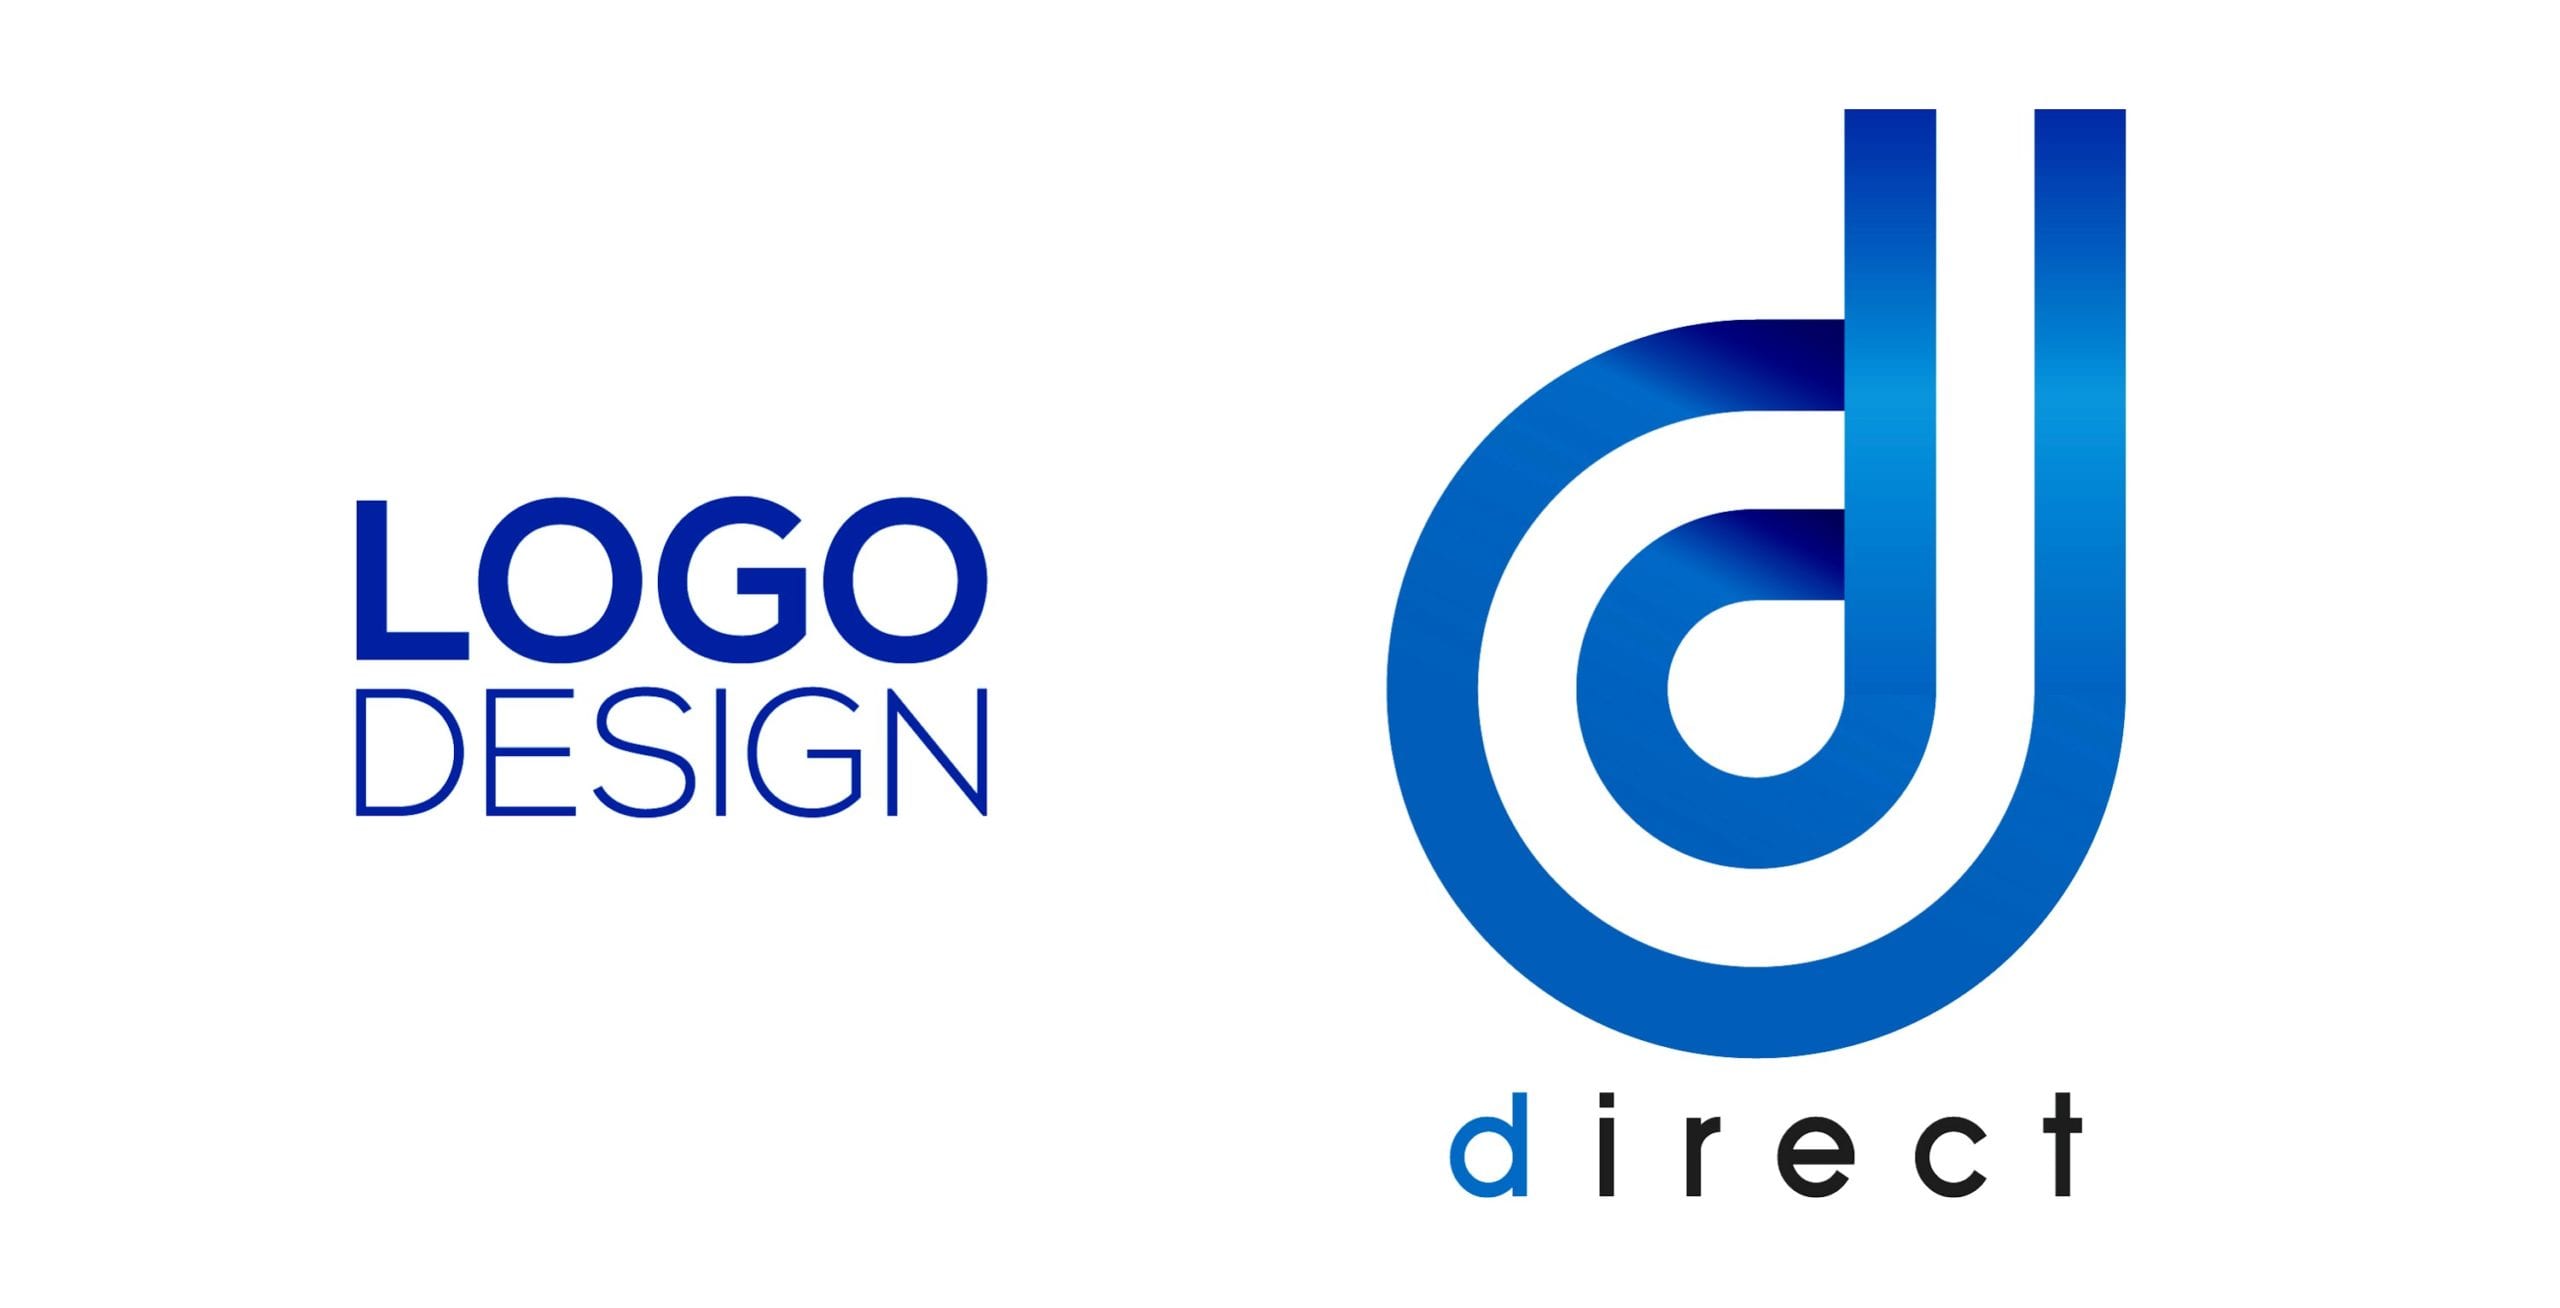 Professional logo design that stands out from the competition